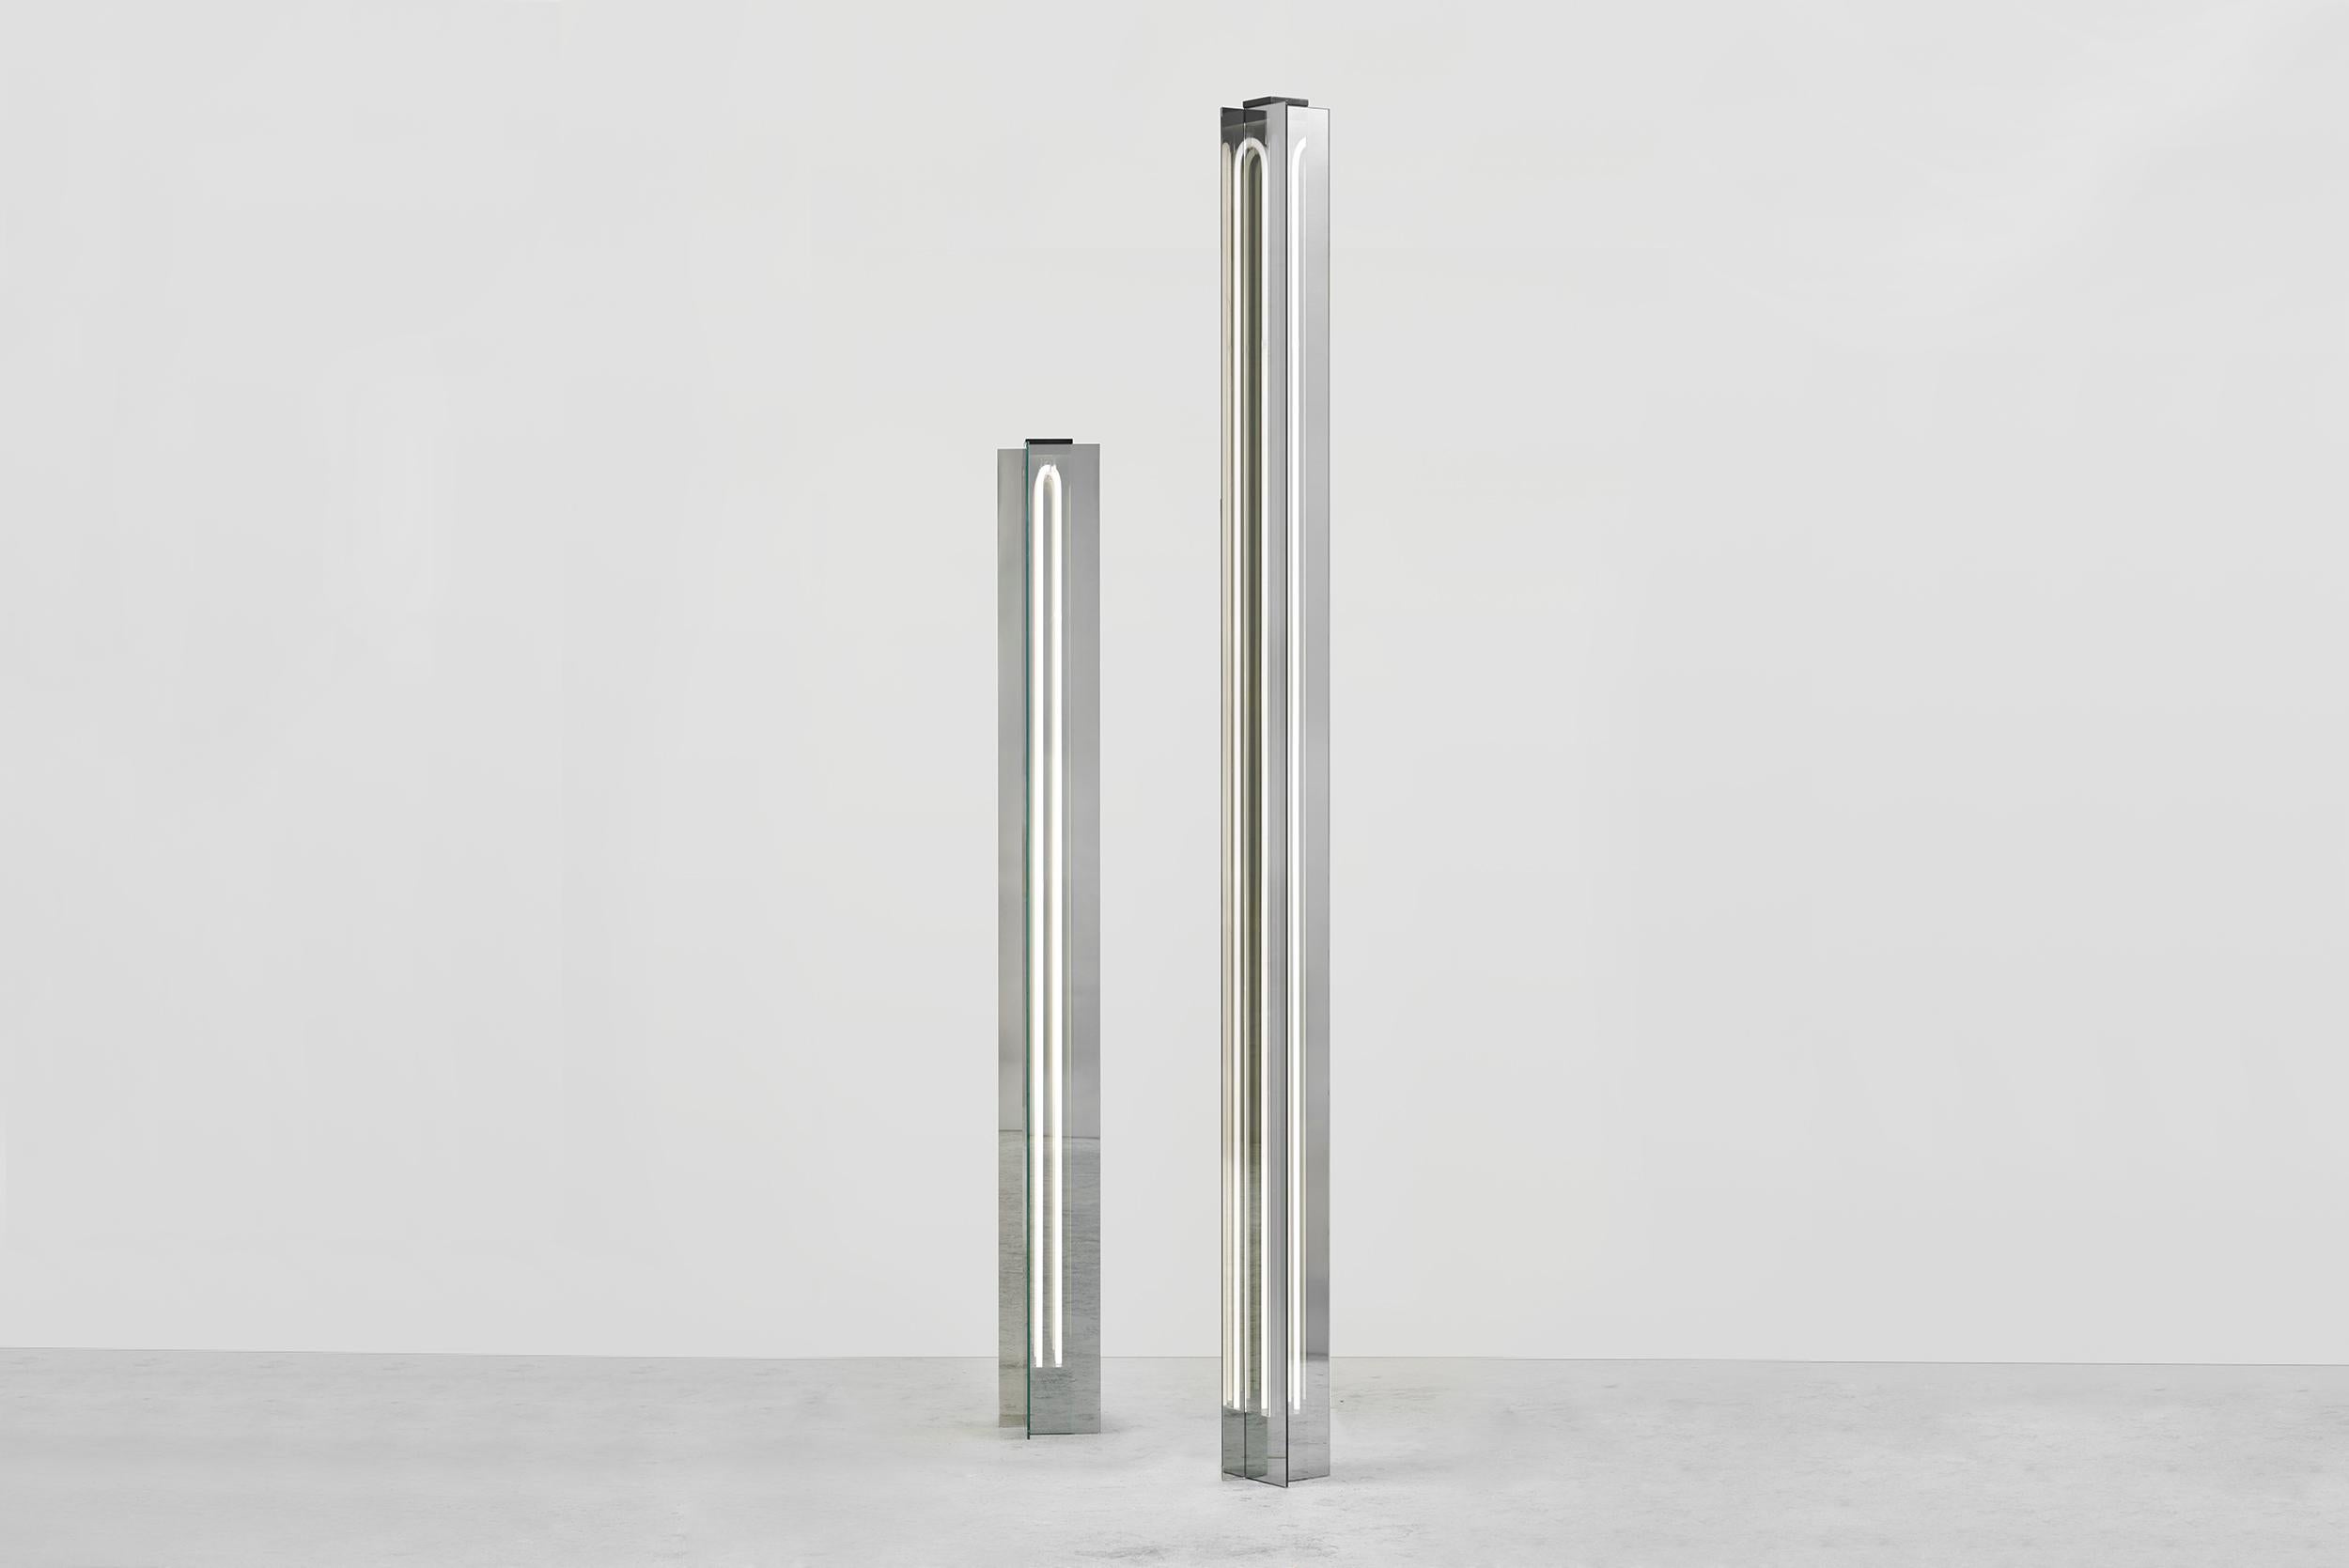 Dutch Sabine Marcelis Floor Lamp “Pillar” Tall From the series “No Fear of Glass” 2019 For Sale